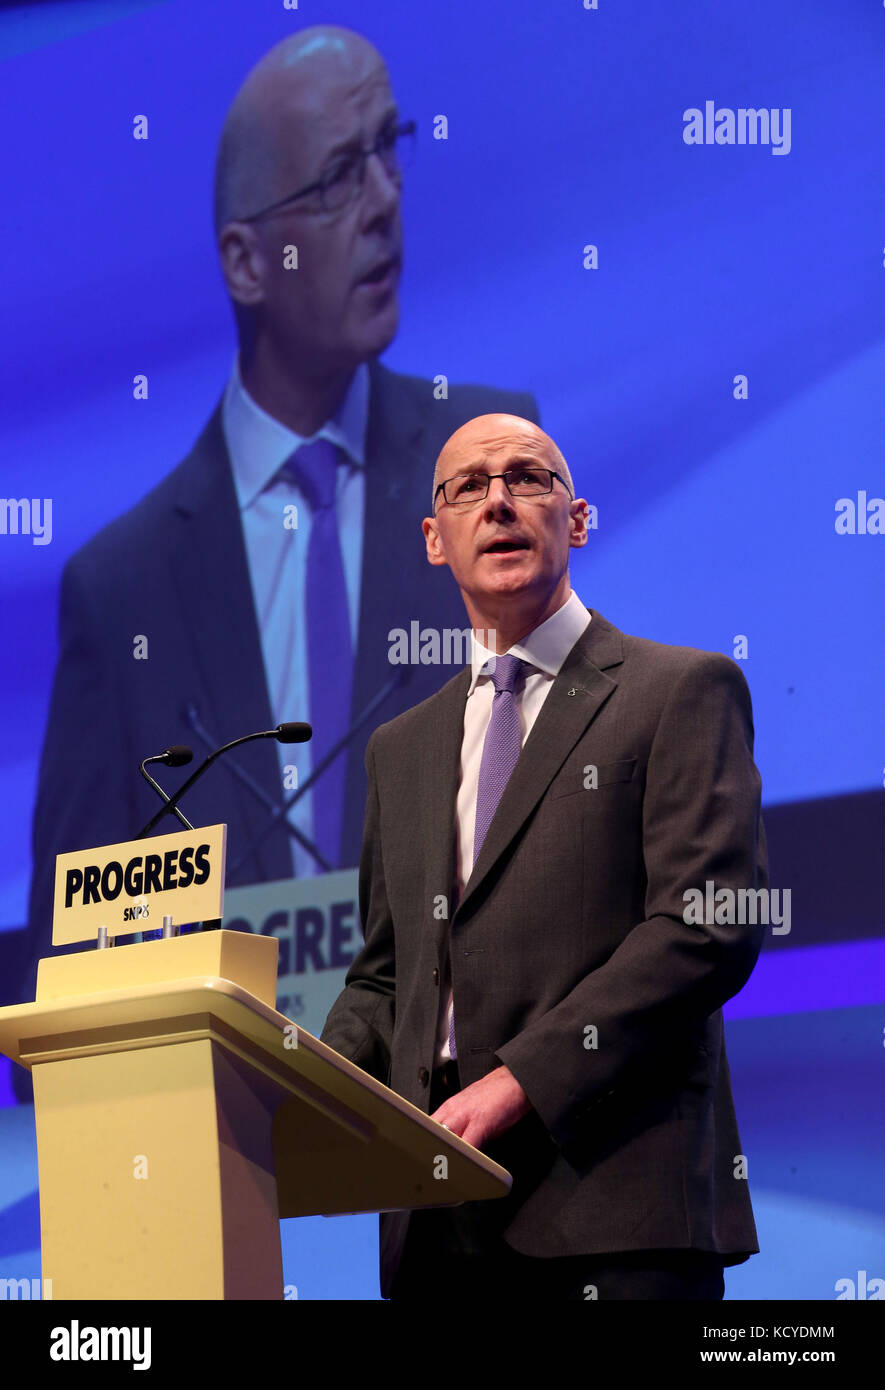 Deputy First Minister of Scotland John Swinney delivers the opening address to delegates at the Scottish National Party (SNP) conference at the SEC Centre in Glasgow. Stock Photo